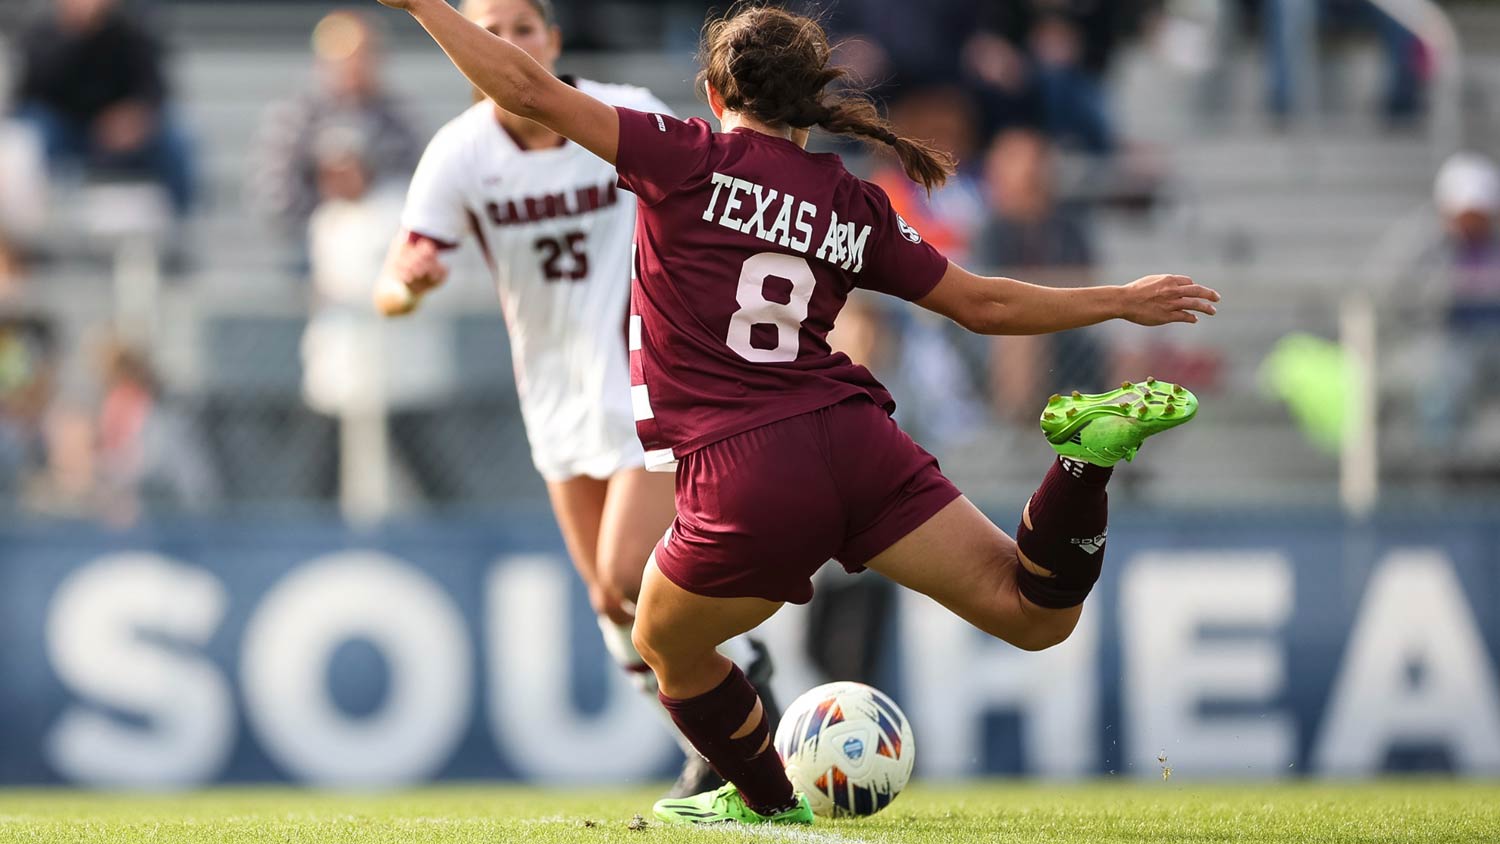 A Texas A&M soccer player prepares to kick the ball past the defense